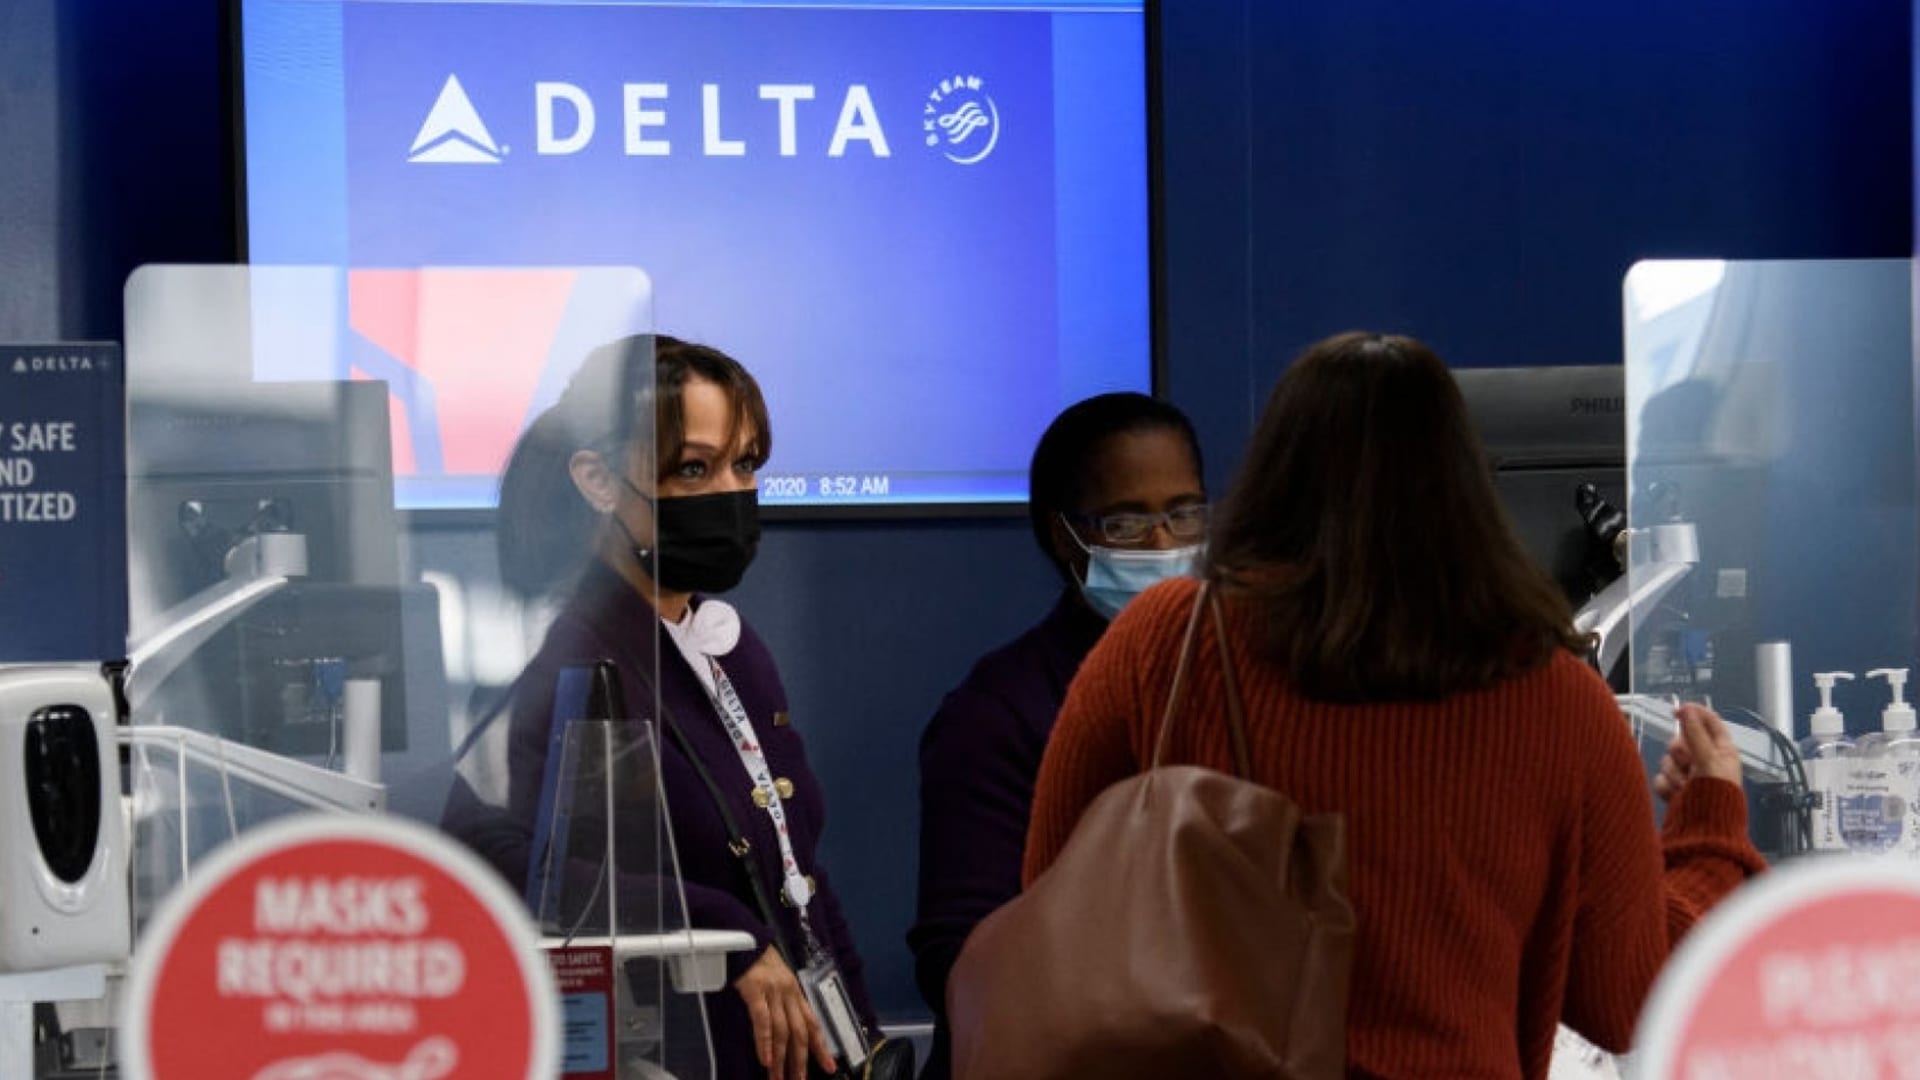 With Just 9 Words, Delta Air Lines Gave a Masterclass in How to Talk to Customers